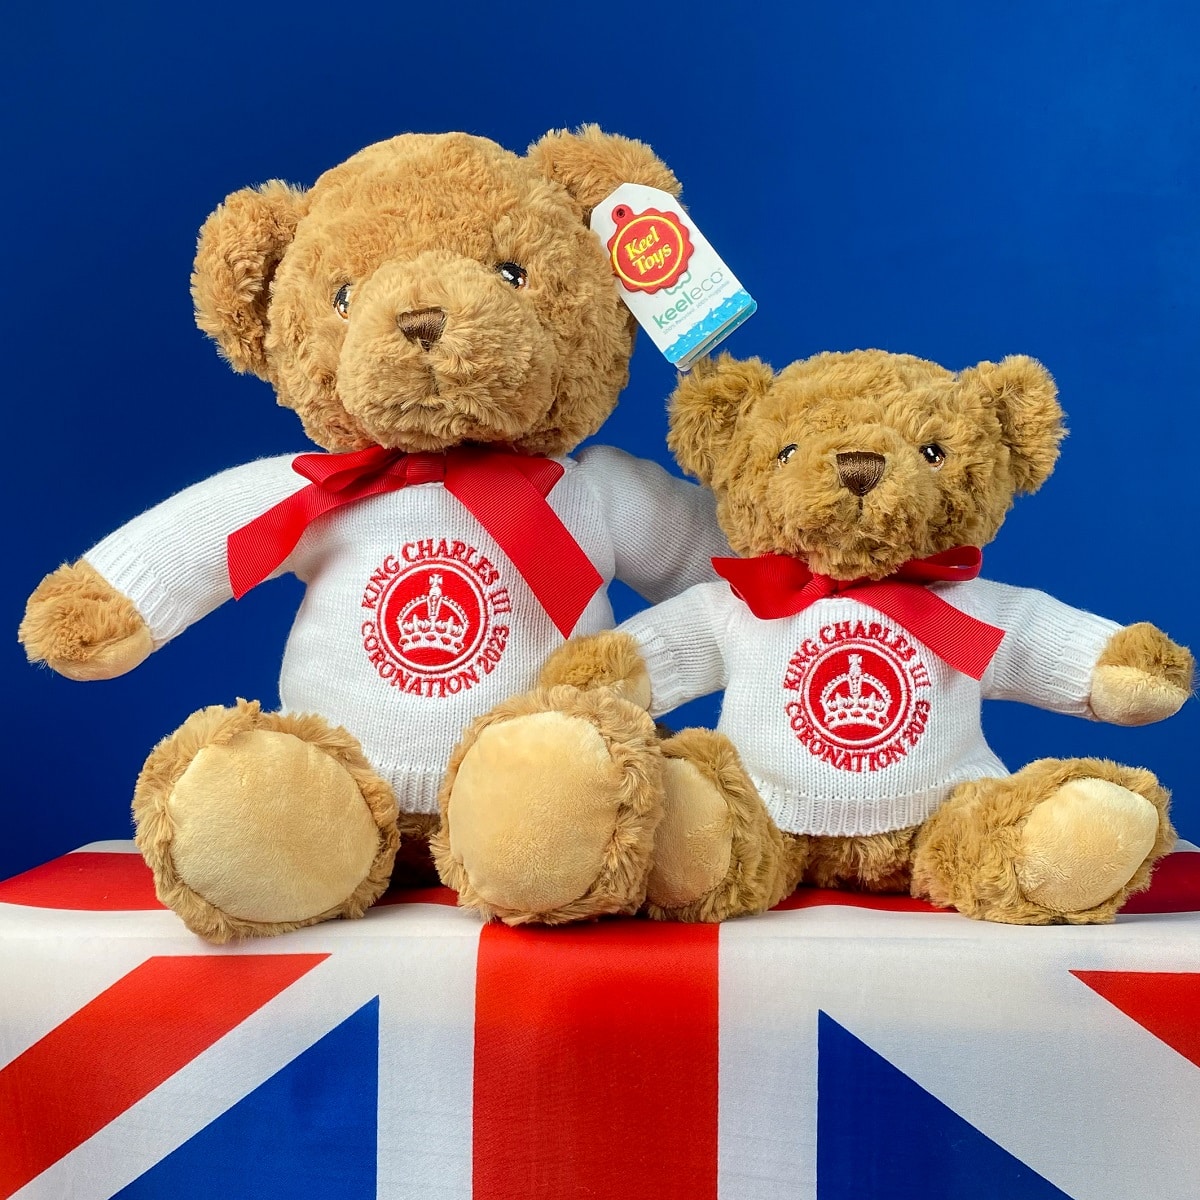 king charles small and large coronation teddy bear with red bow